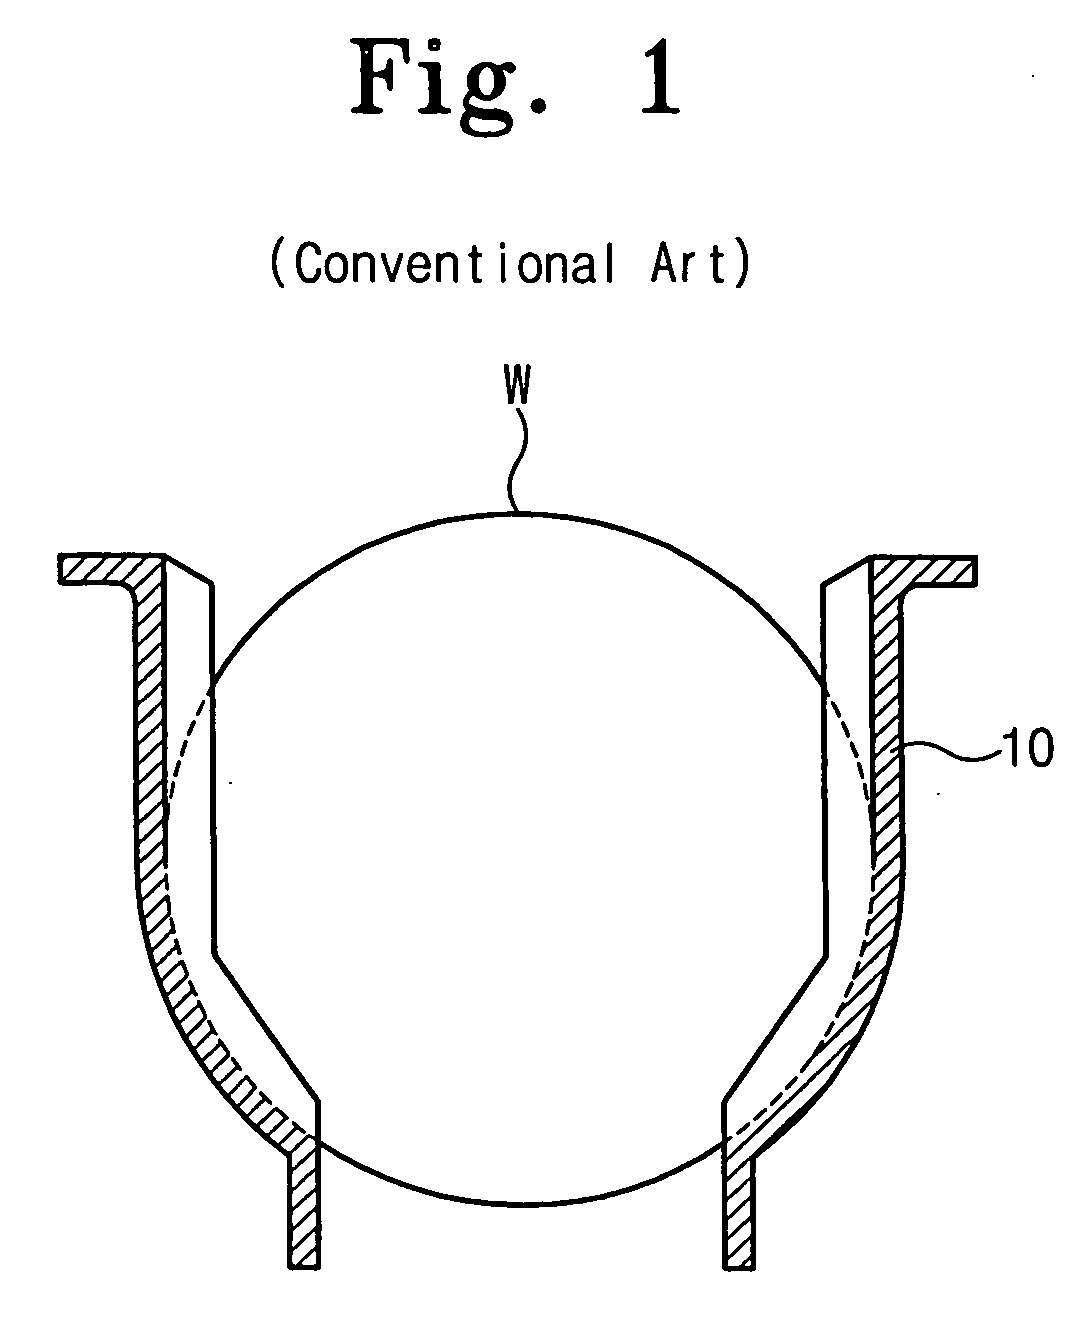 Wafer carrier for minimizing contacting area with wafers